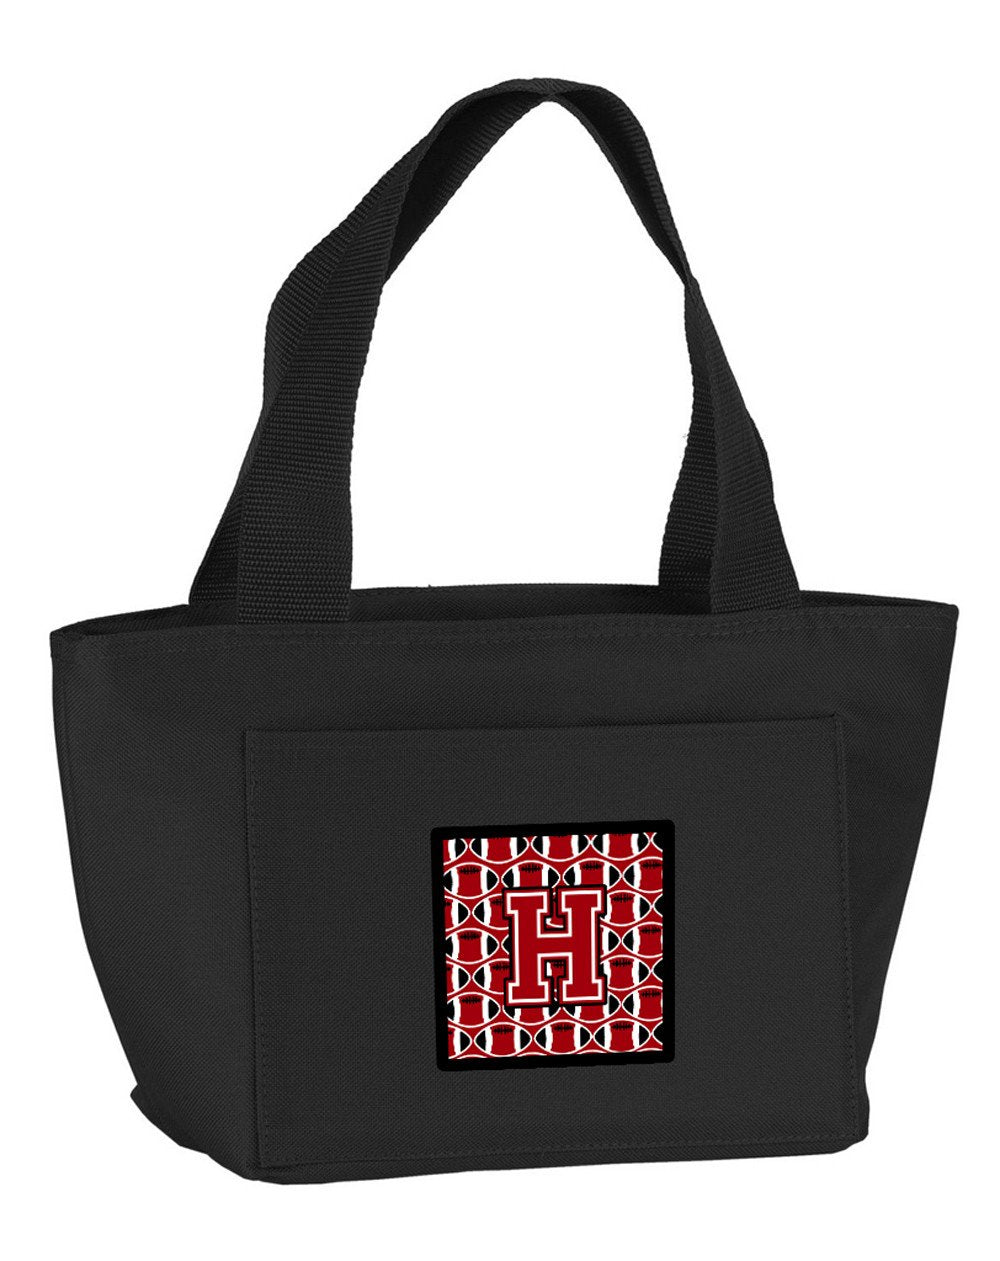 Letter H Football Red, Black and White Lunch Bag CJ1073-HBK-8808 by Caroline's Treasures